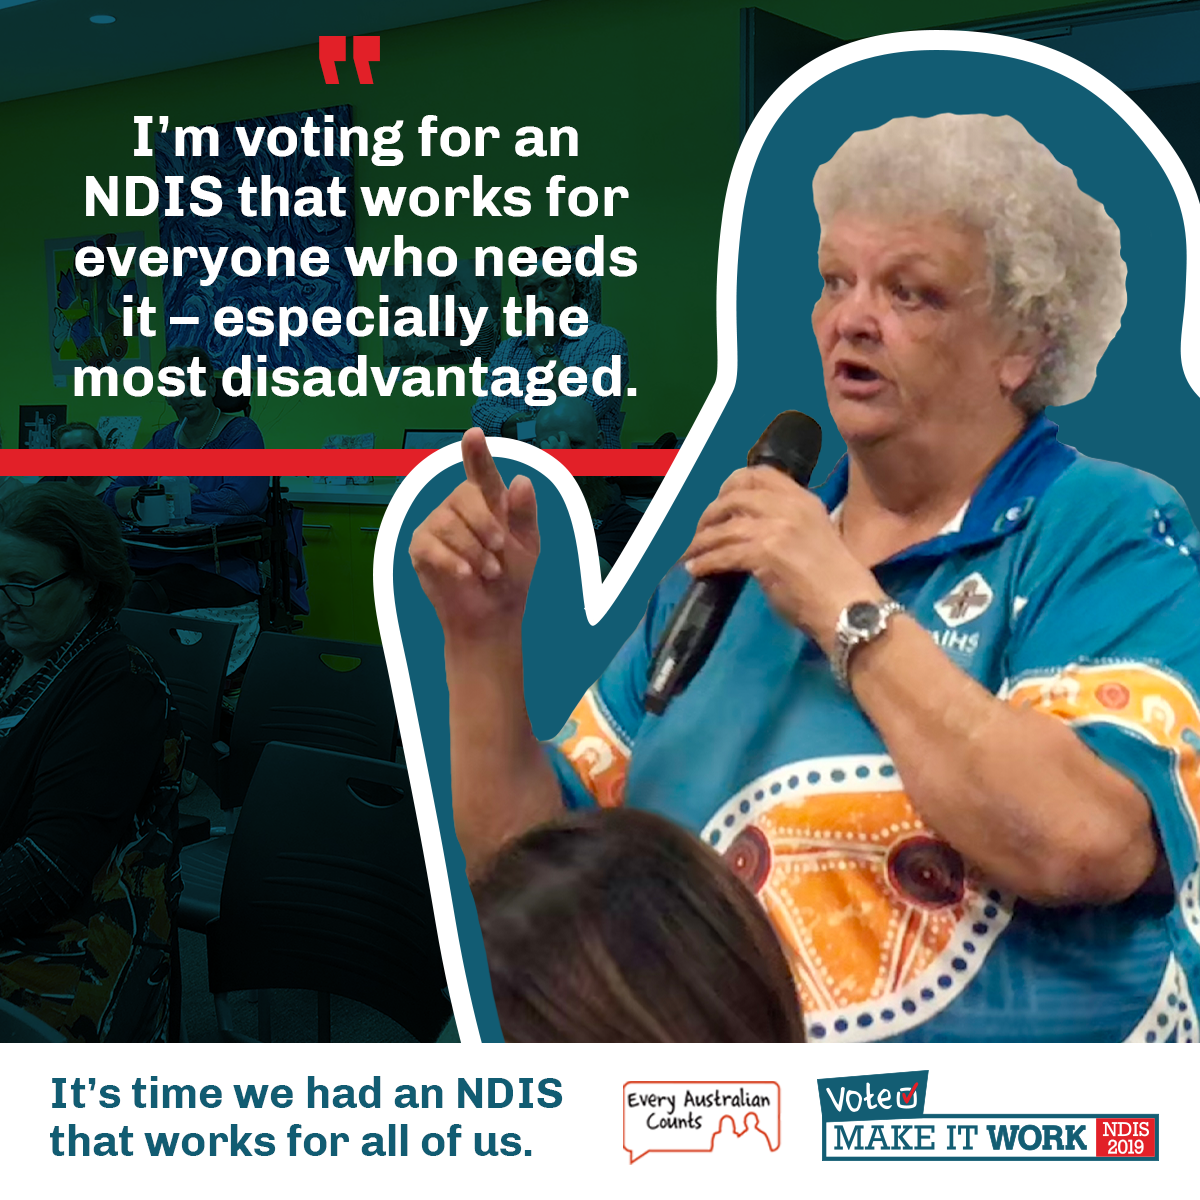 Sharegraphic - I'm voting for an NDIS that works for everyone who needs it - especially the most disadvantaged